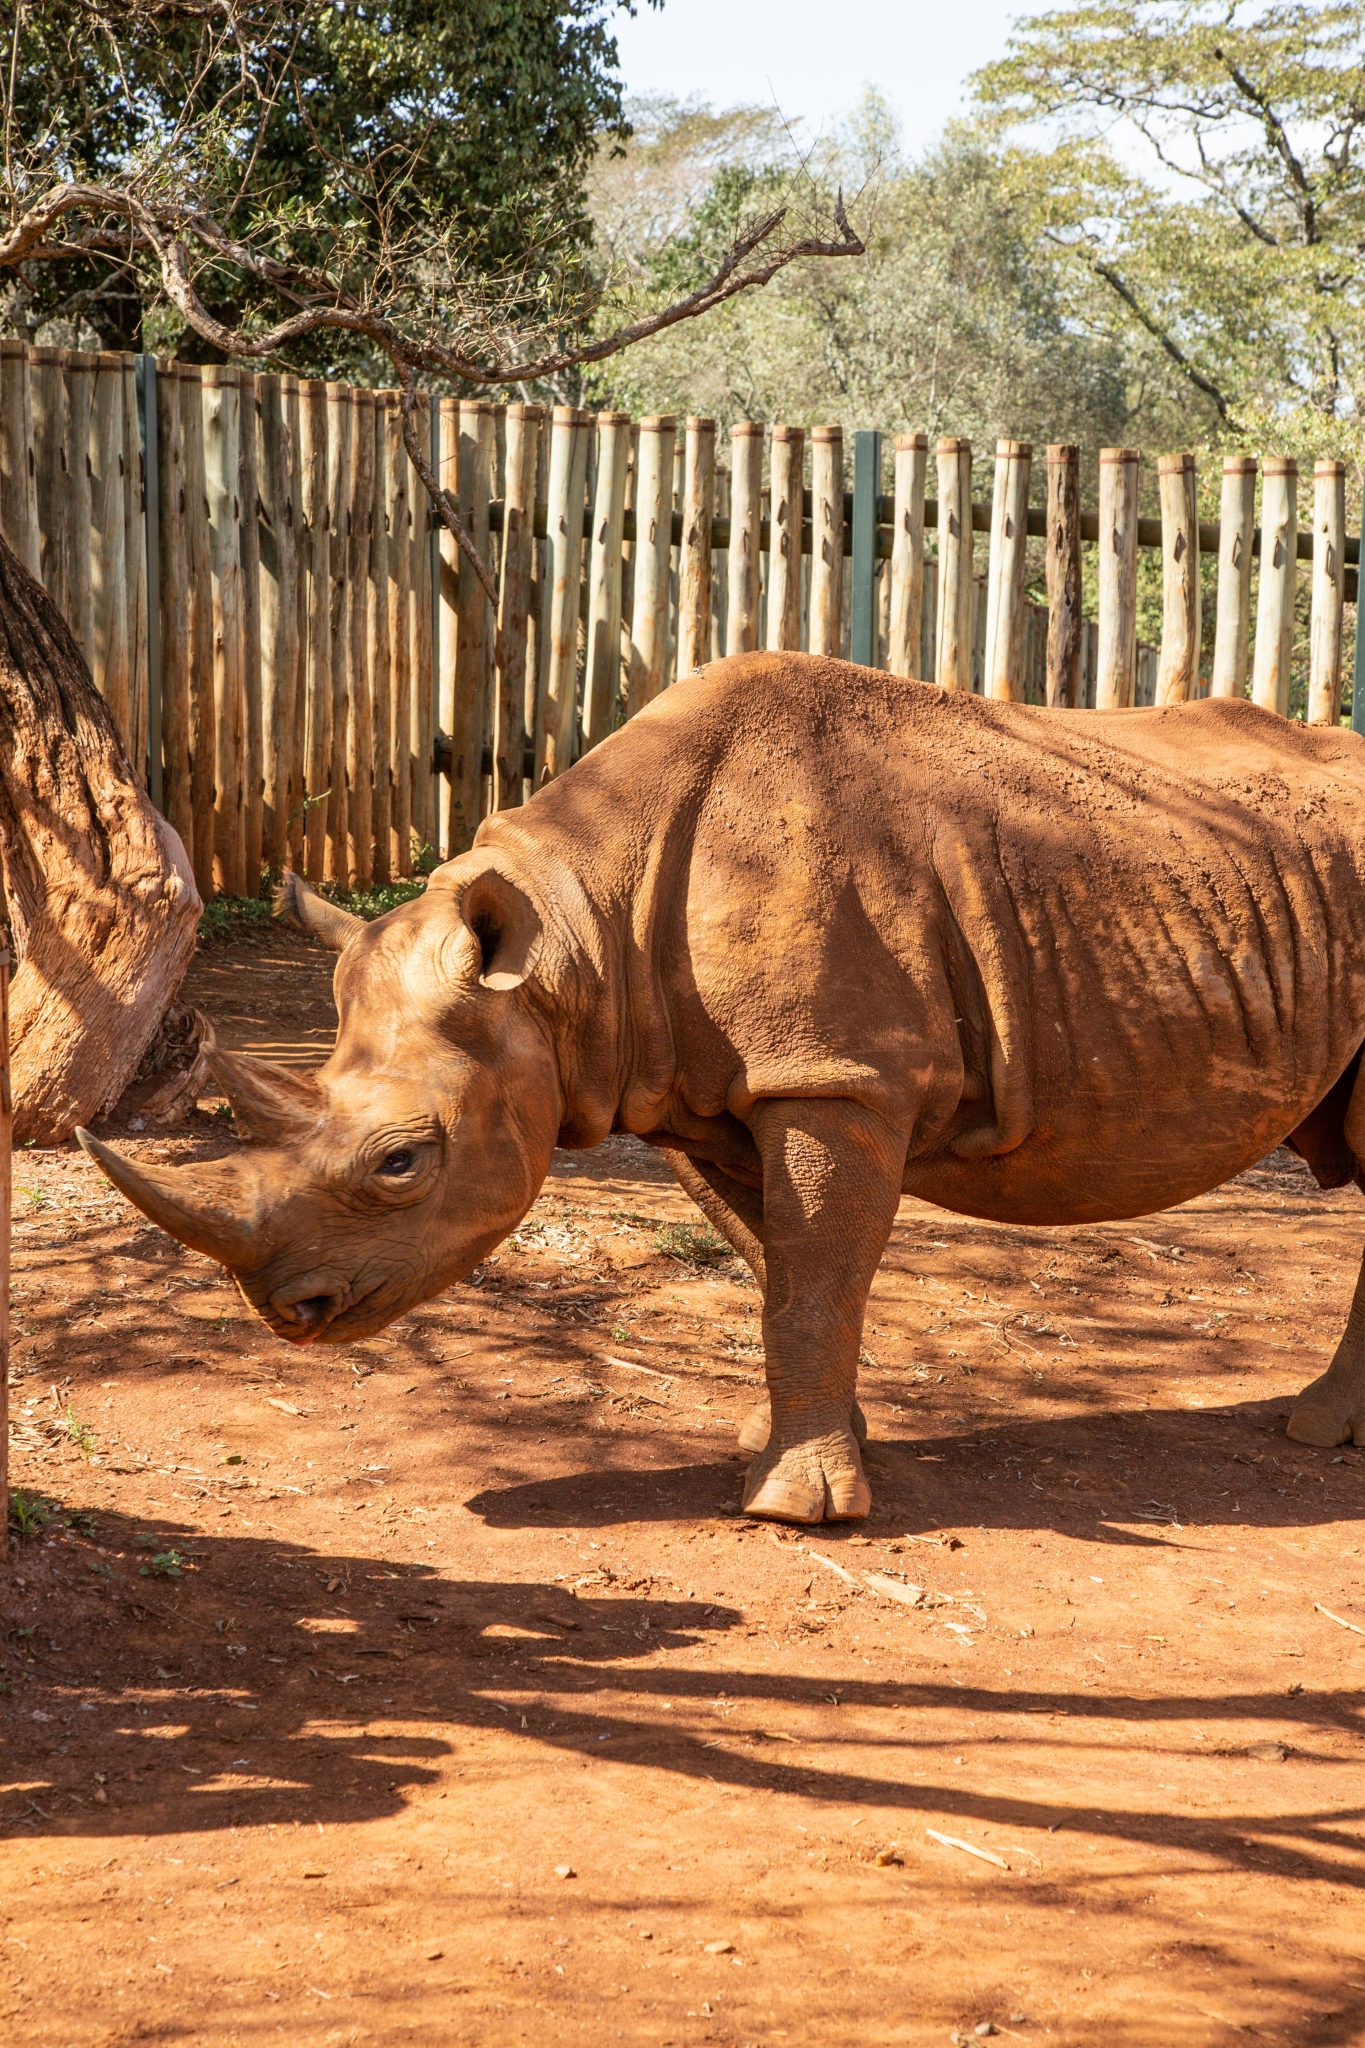 There is also a blind rhino in the care of Sheldricks you can meet during a private visit.